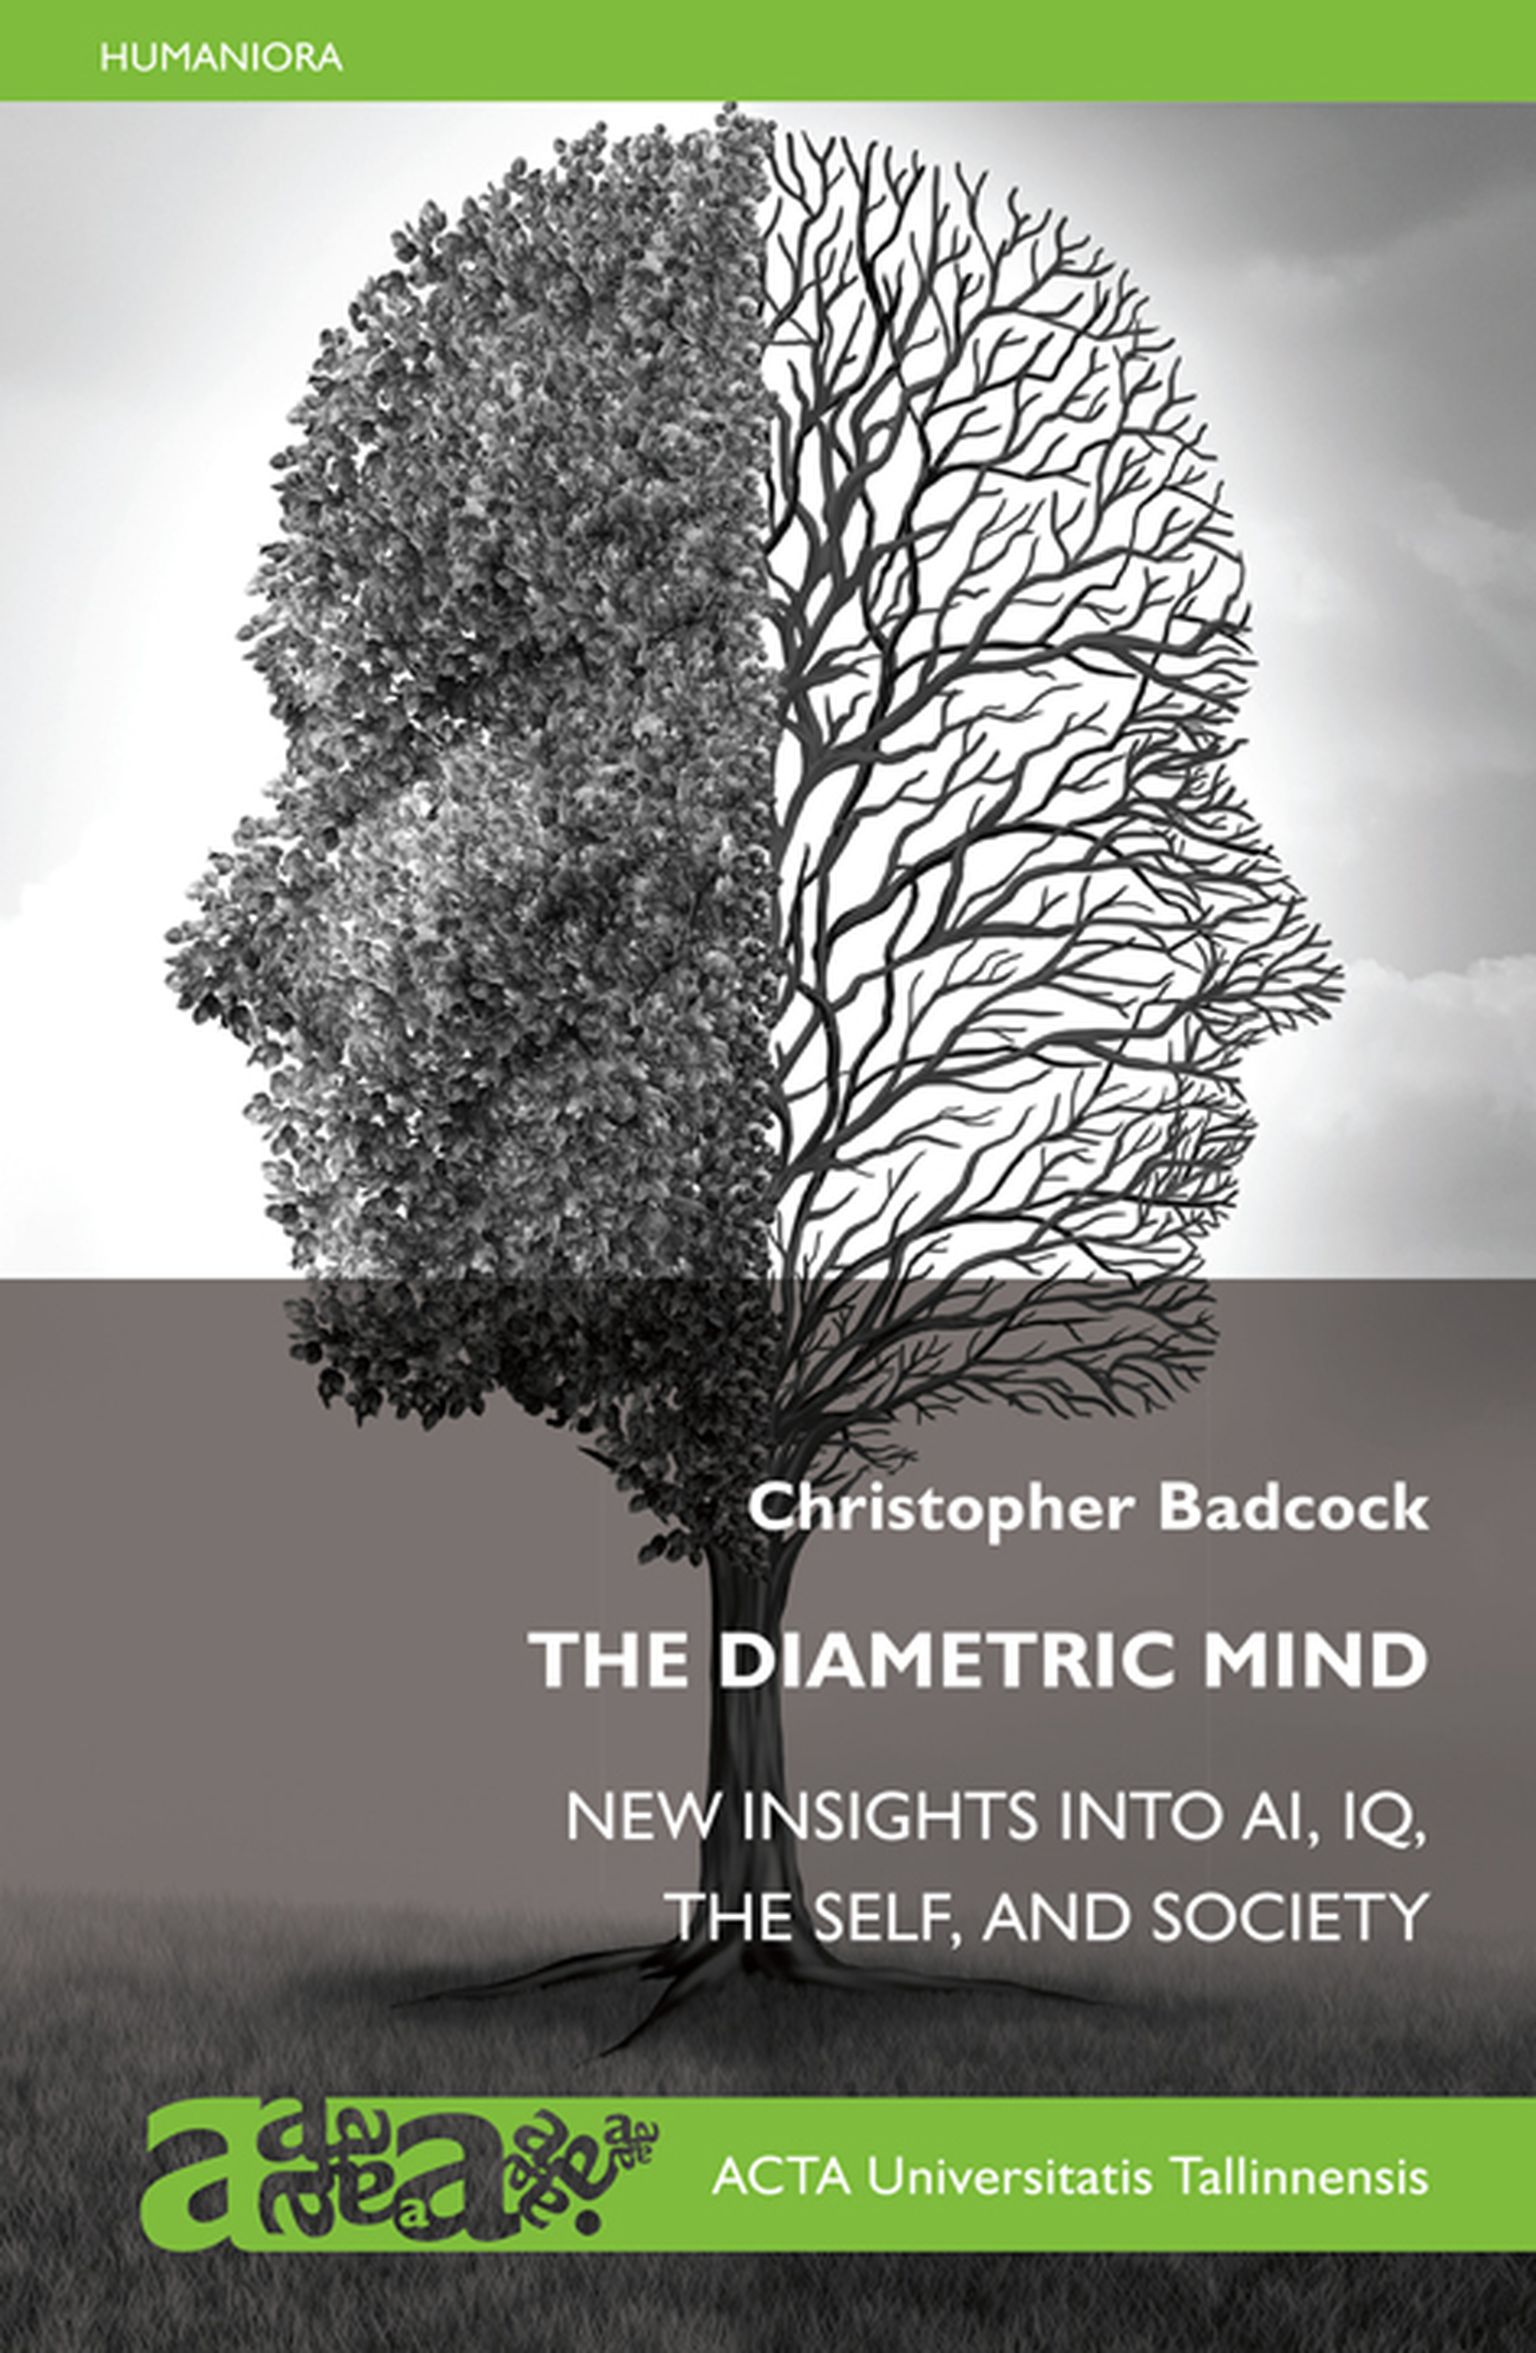 Christopher Badcock, „The Diametric Mind: New Insights into AI, IQ, the Self and Society”.